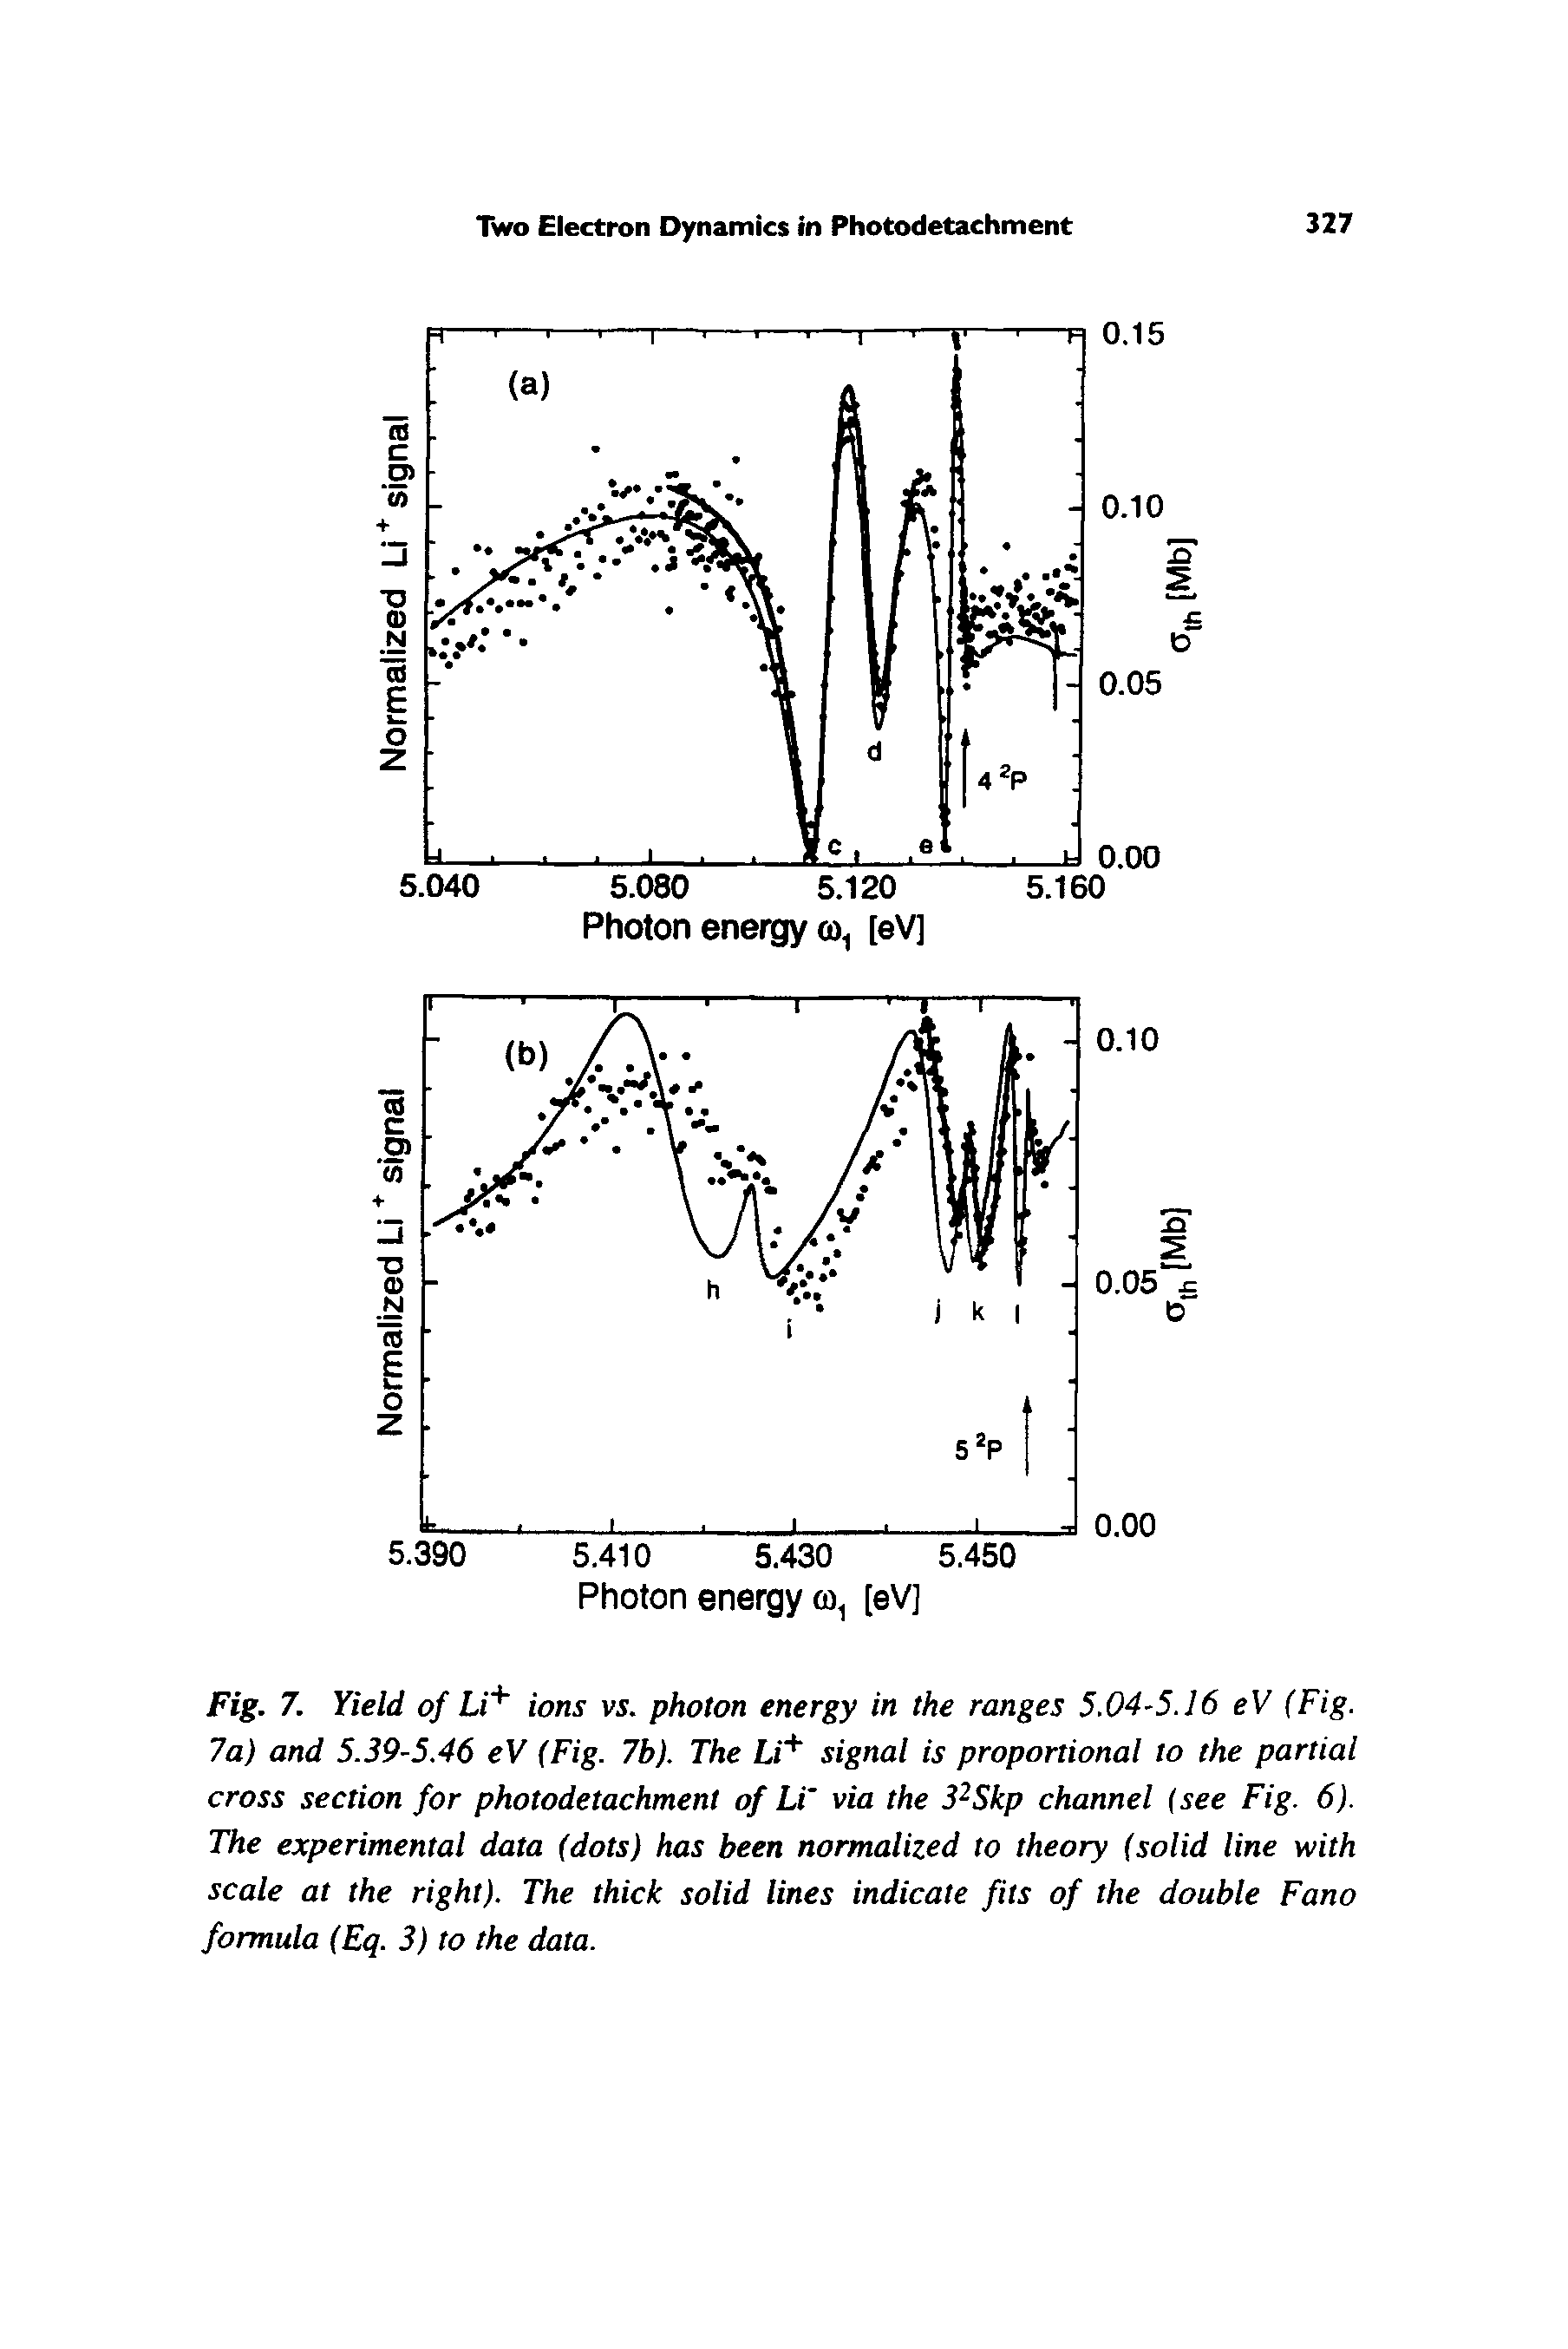 Fig. 7. Yield of Li ions vs. photon energy in the ranges 5.04-5.16 eV (Fig. 7a) and 5.39-5.46 cV (Fig. 7b). The Li" " signal is proportional to the partial cross section for photodetachment of Li via the 3 Skp channel see Fig. 6). The experimental data (dots) has been normalized to theory (solid line with scale at the right). The thick solid lines indicate fits of the double Fano formula (Eq. 3) to the data.